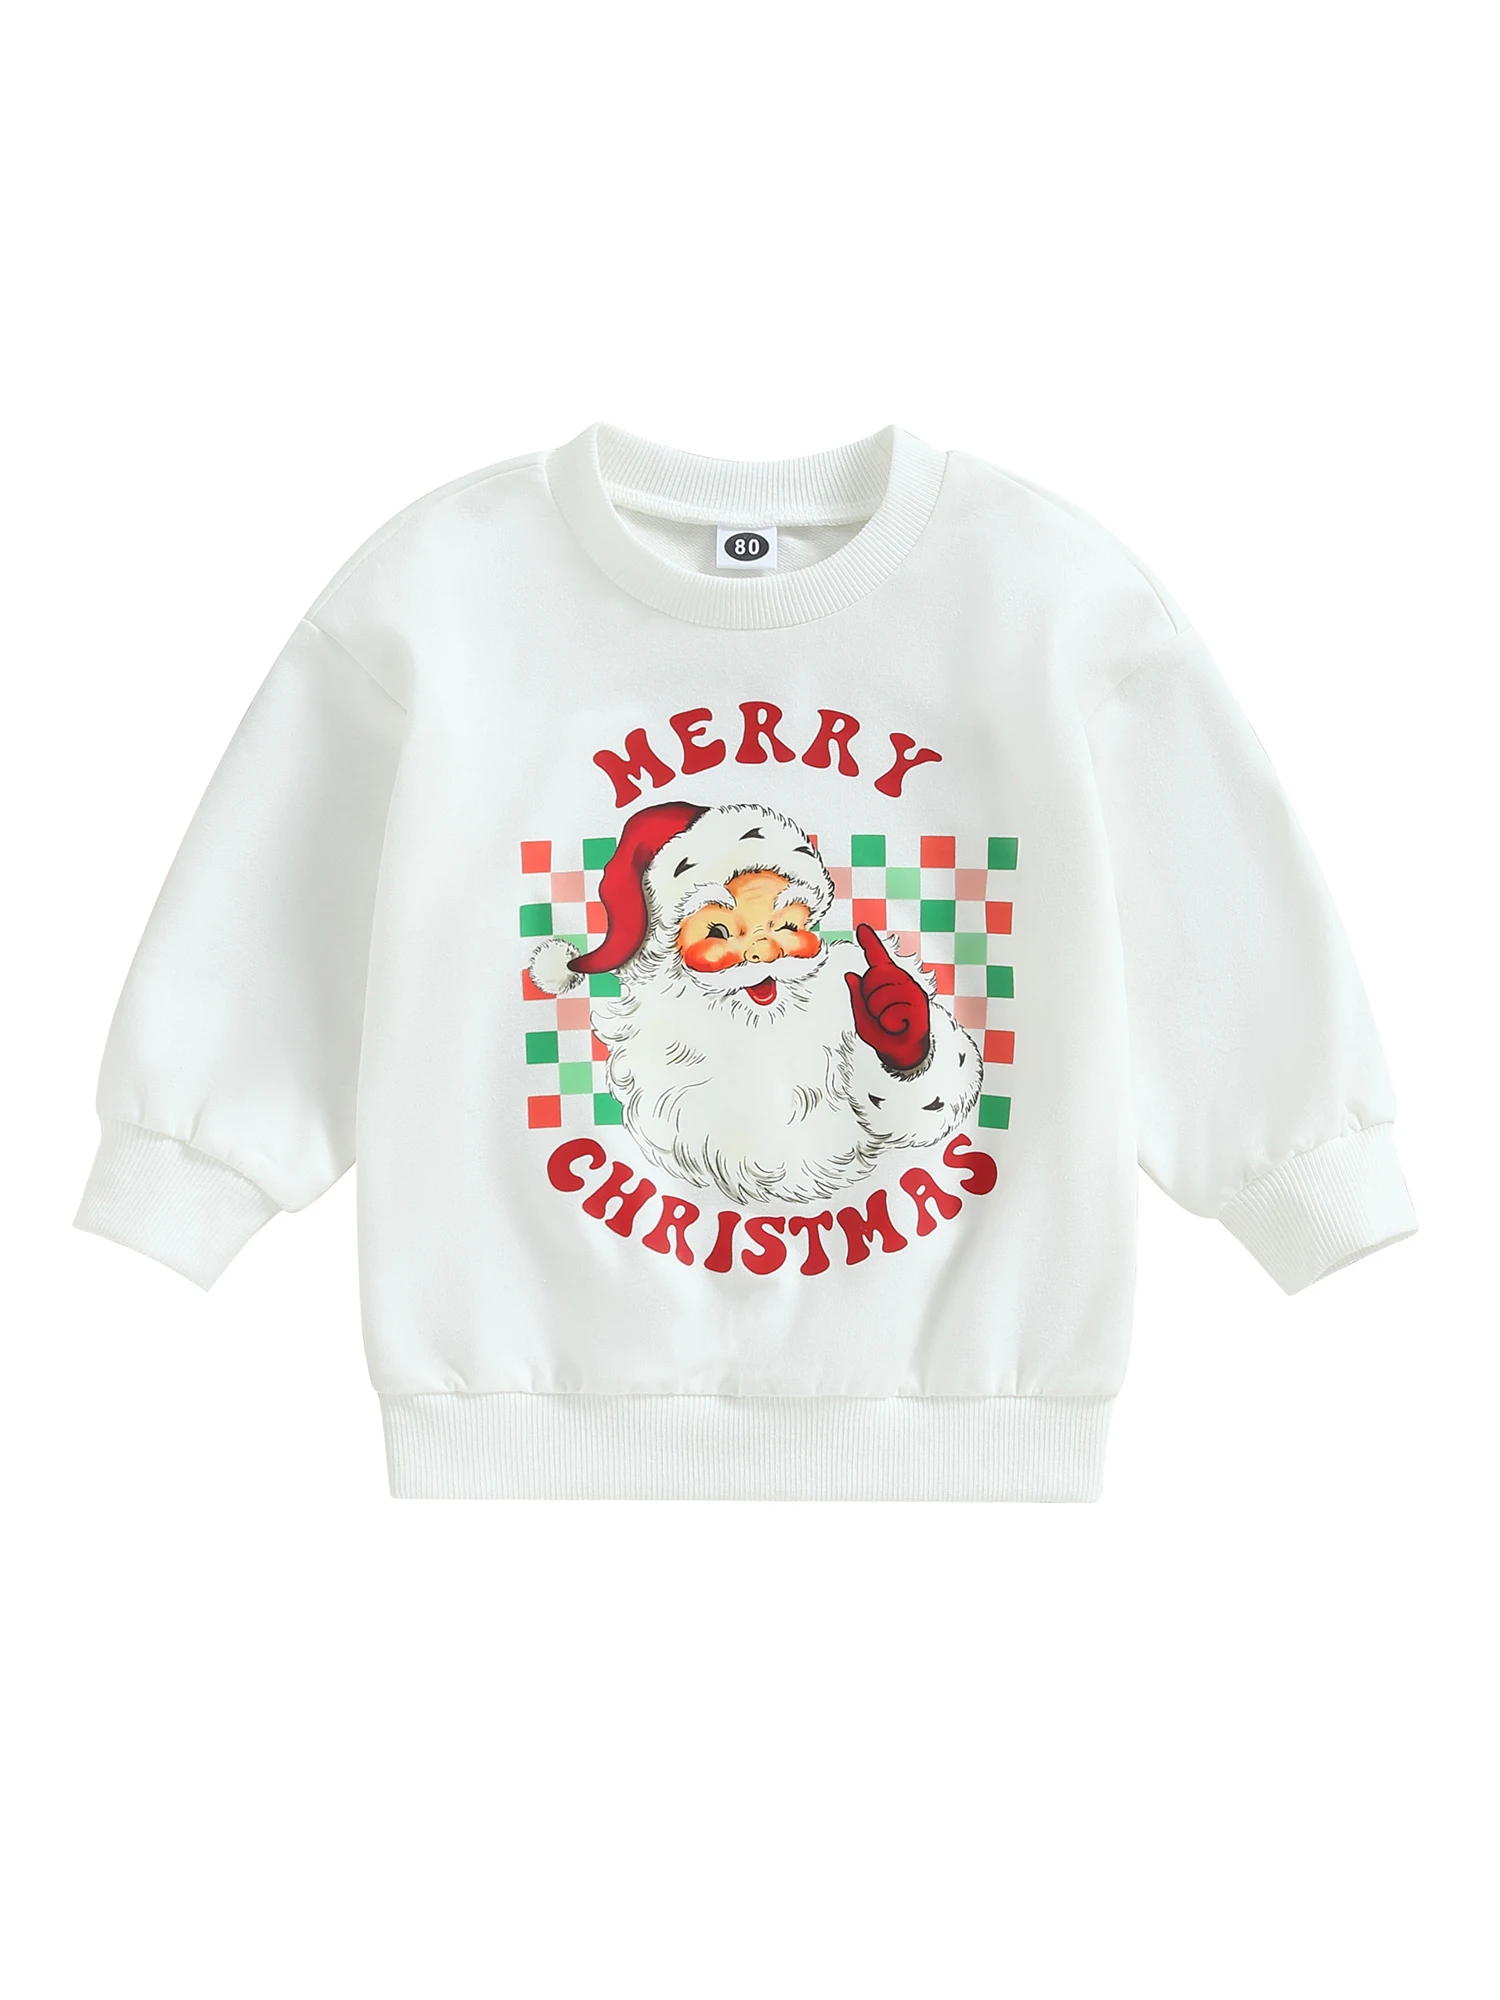 

Cute Infant Unisex Christmas Sweater with Adorable Reindeer Print and Cozy Long Sleeves - Perfect Holiday Pullover for Baby